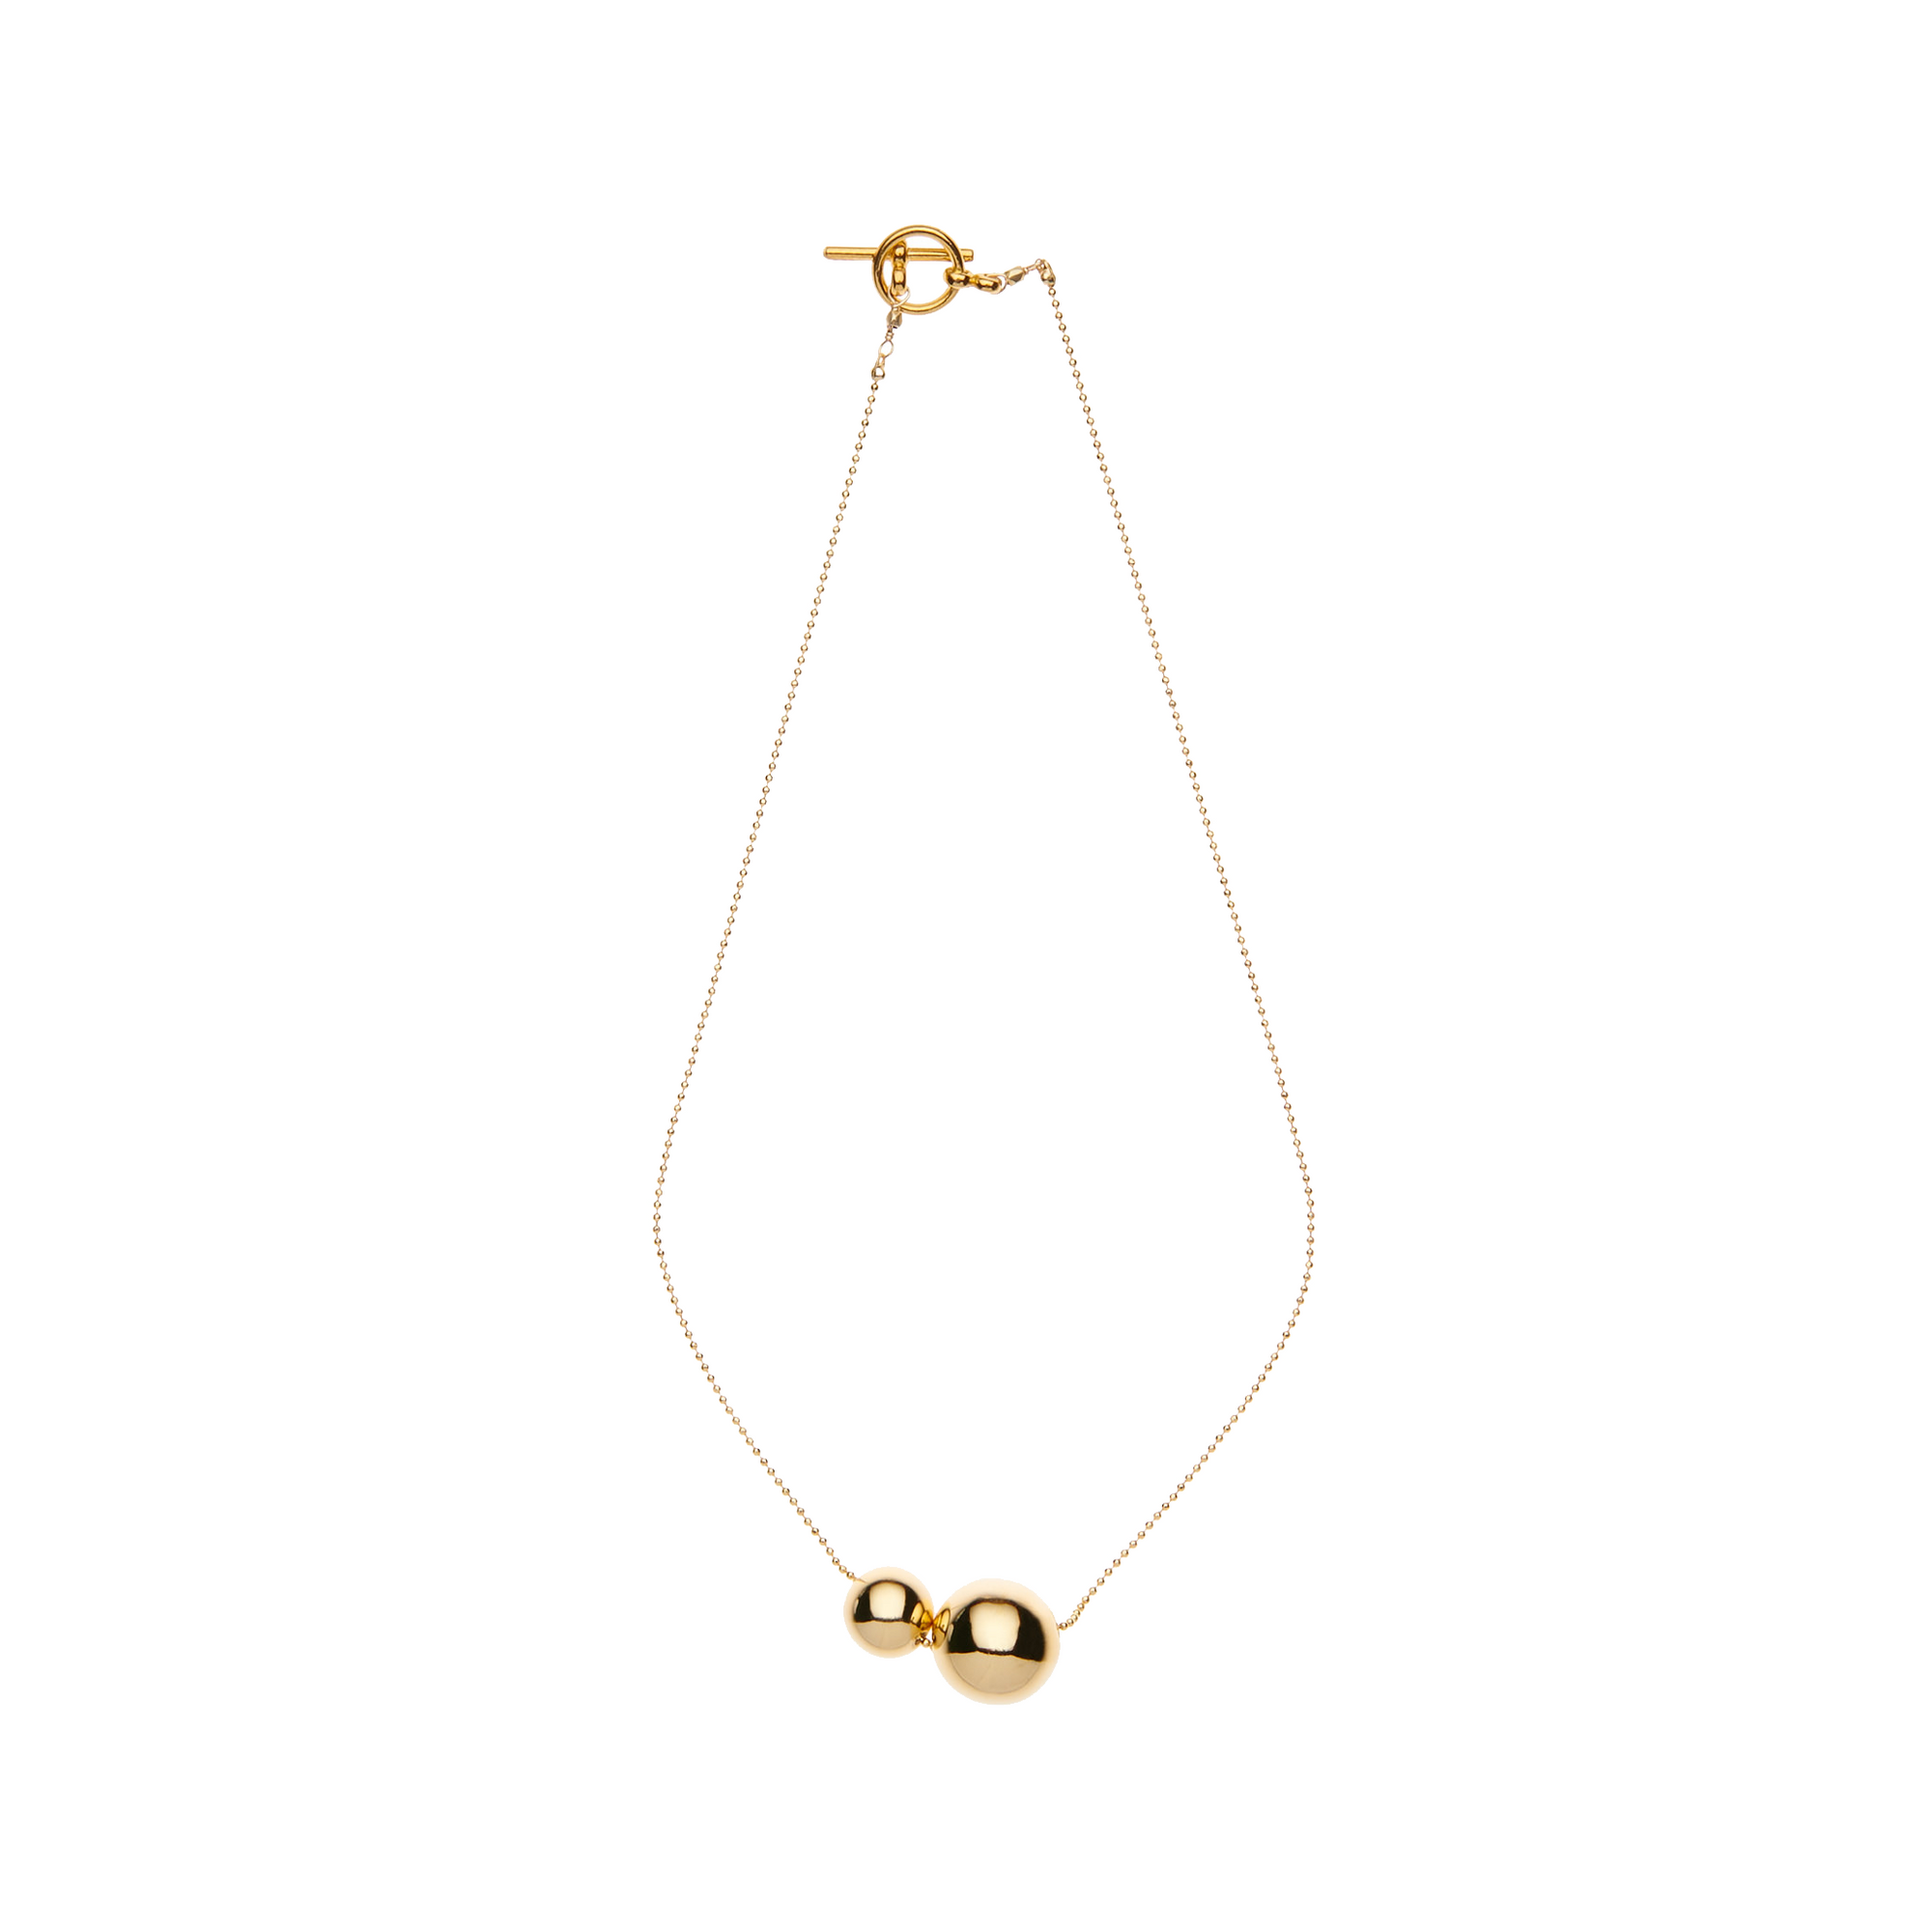 Two gold ball necklace by vivien walsh